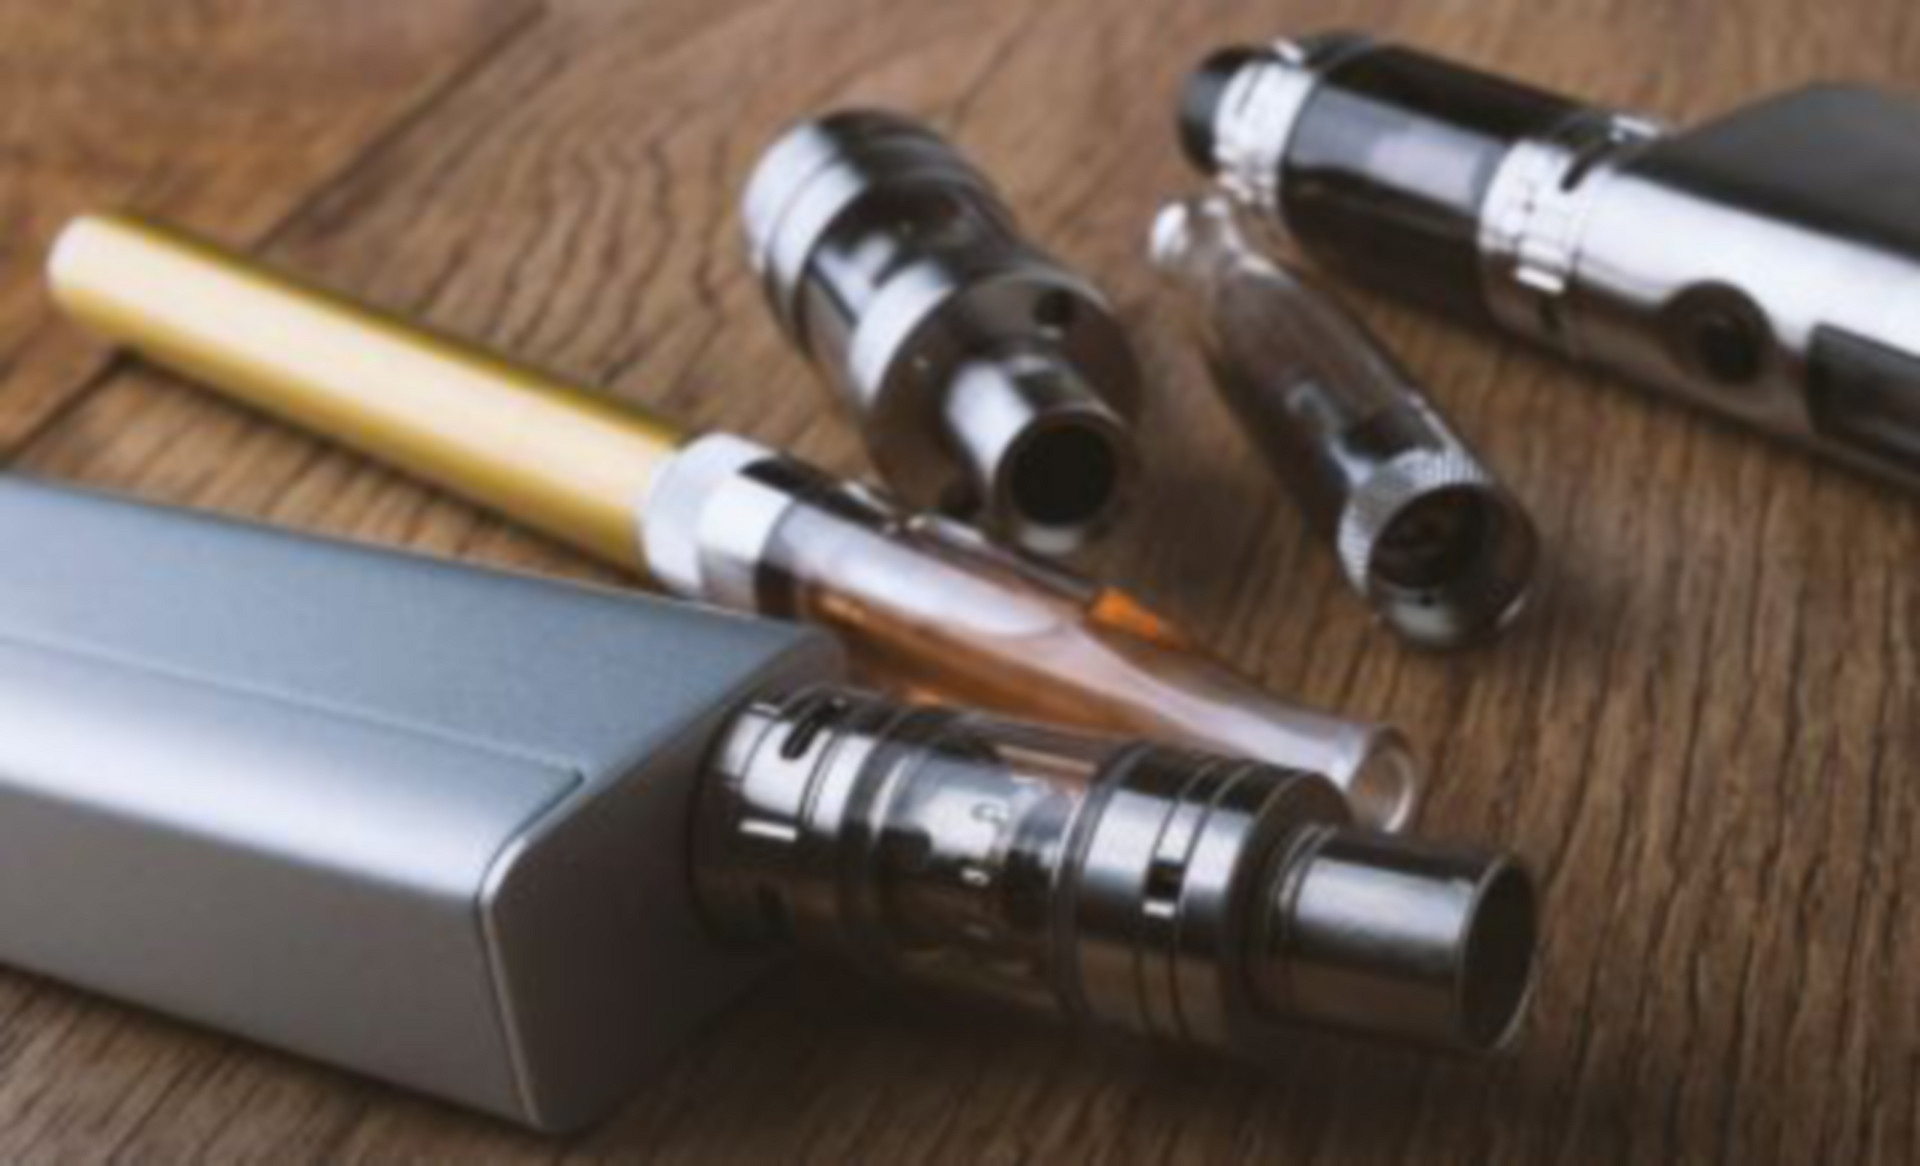 A variety of e-cigarette devices on a wooden table